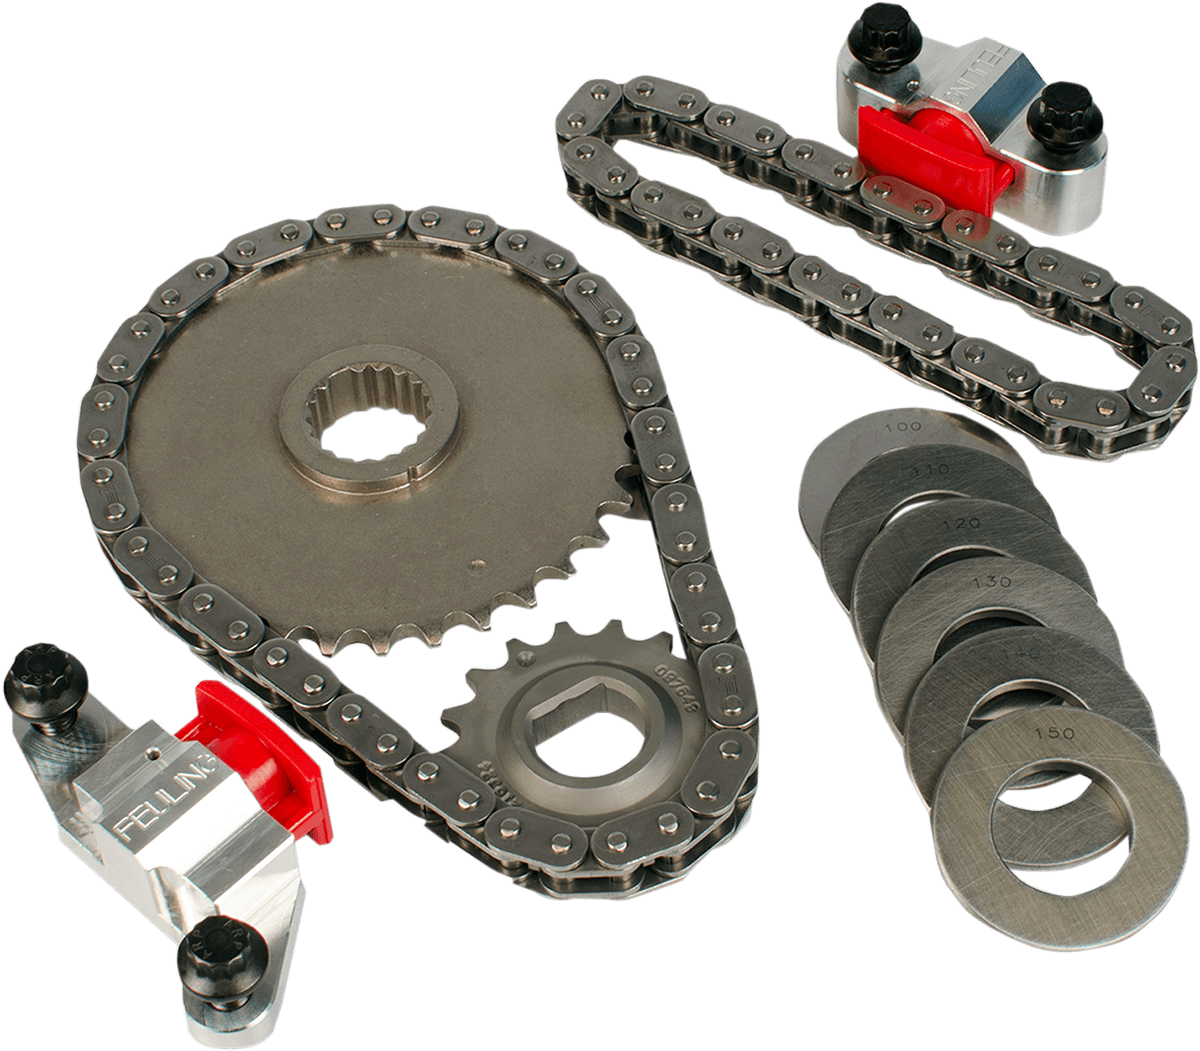 FEULING-OE+® Hydraulic Cam Chain Tensioner Conversion / Early Twin Cam-Cam Tensioners-MetalCore Harley Supply